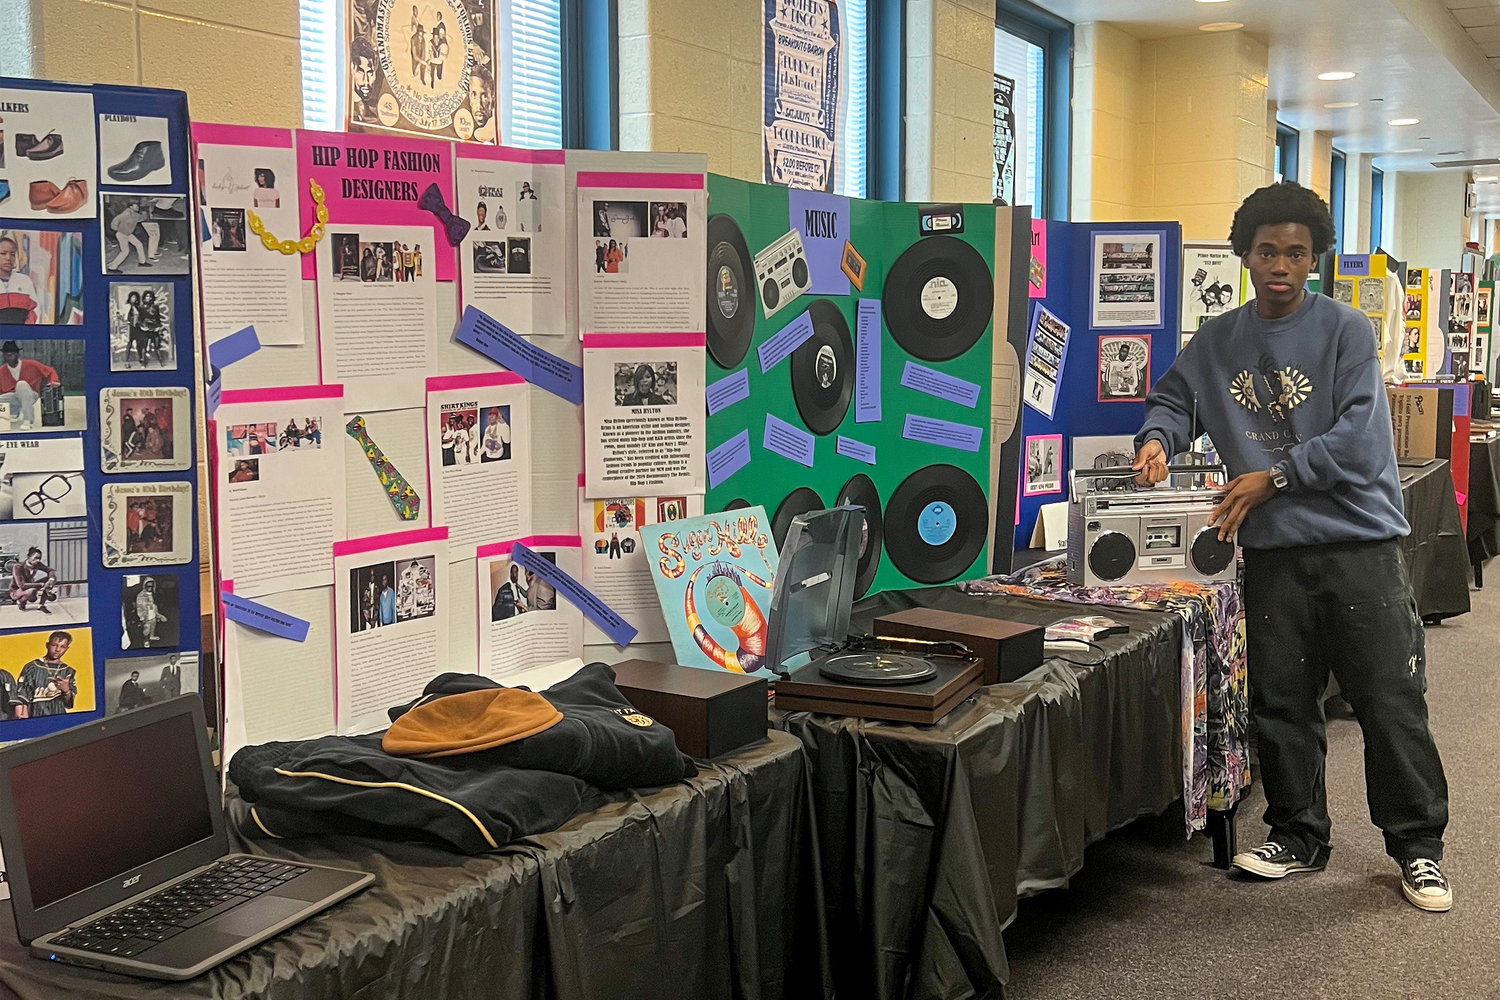 Mitchell Jefferson, president of the Black Student Union & Allies Club at Riverdale / Kingsbridge Academy, worked together with his club mates led by librarian Julia Loving to honor the history of hip-hop as it turns 50 this year. On the table is clothing, a boom box, and a record player complete with top rap hits.